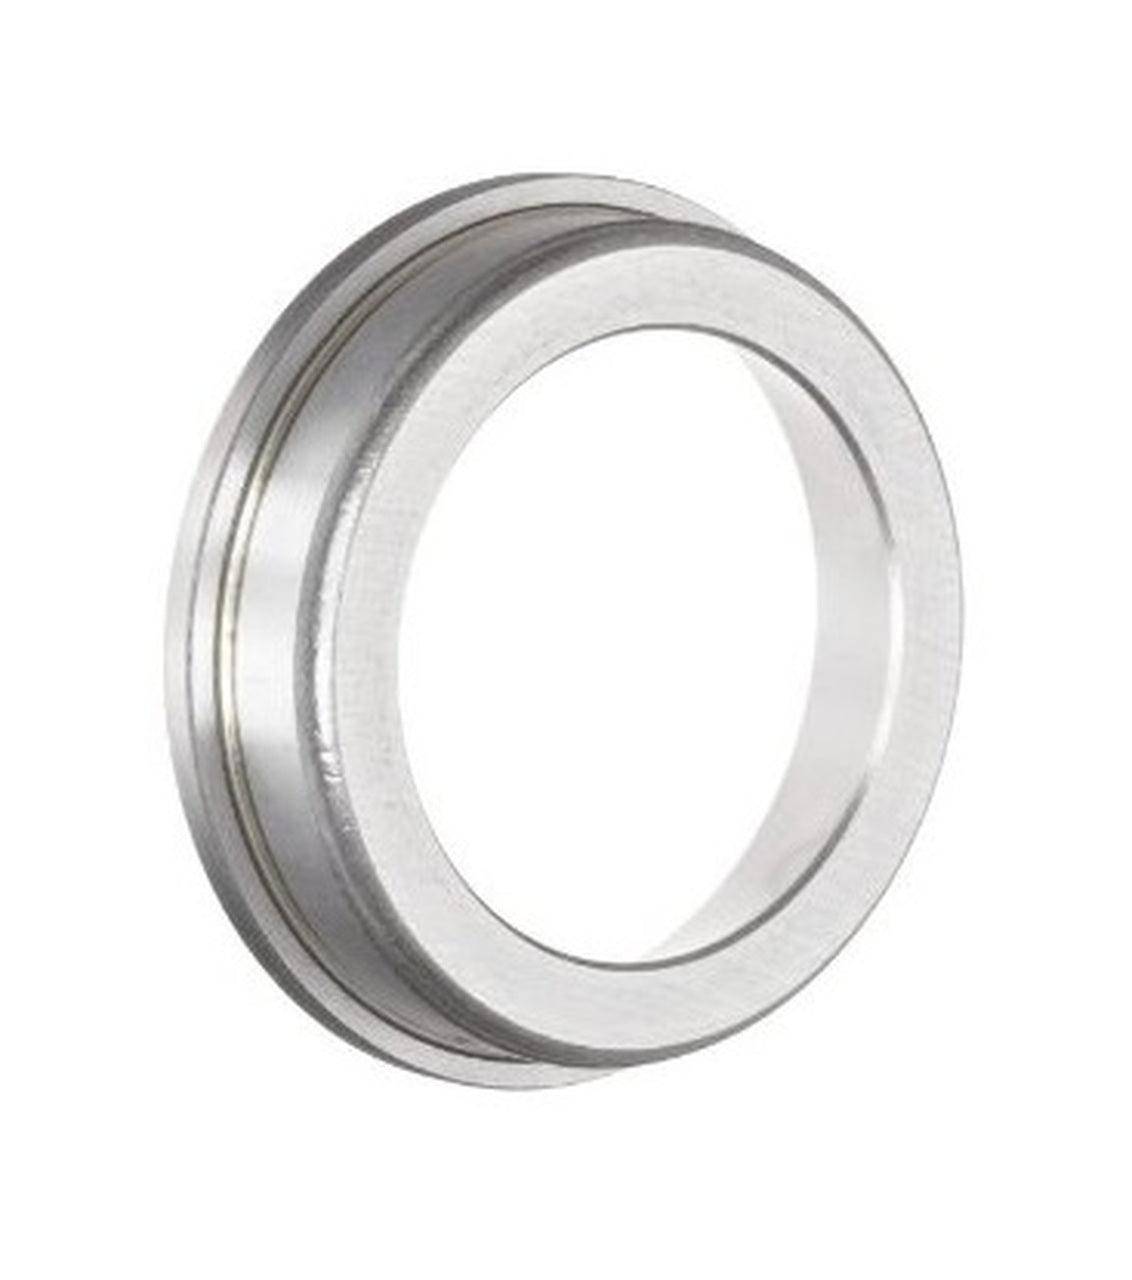 Timken 354B Tapered Roller Bearing Cup - Single Cup, 3.3465 in OD, 0.6875 in Width, Chrome Steel, Flanged Cup - Apollo Industries llc